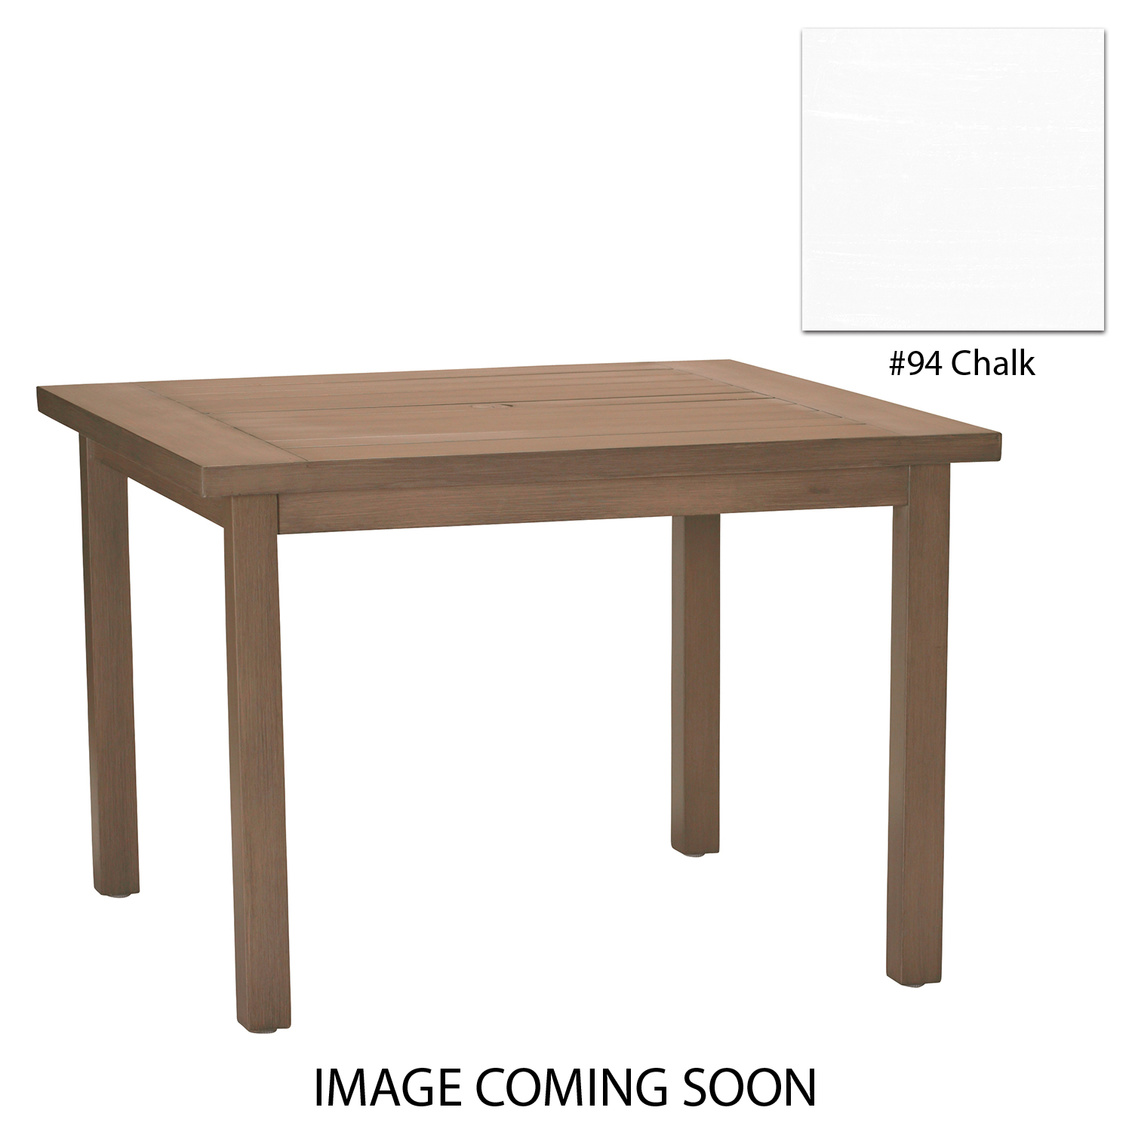 club aluminum square dining table in chalk product image